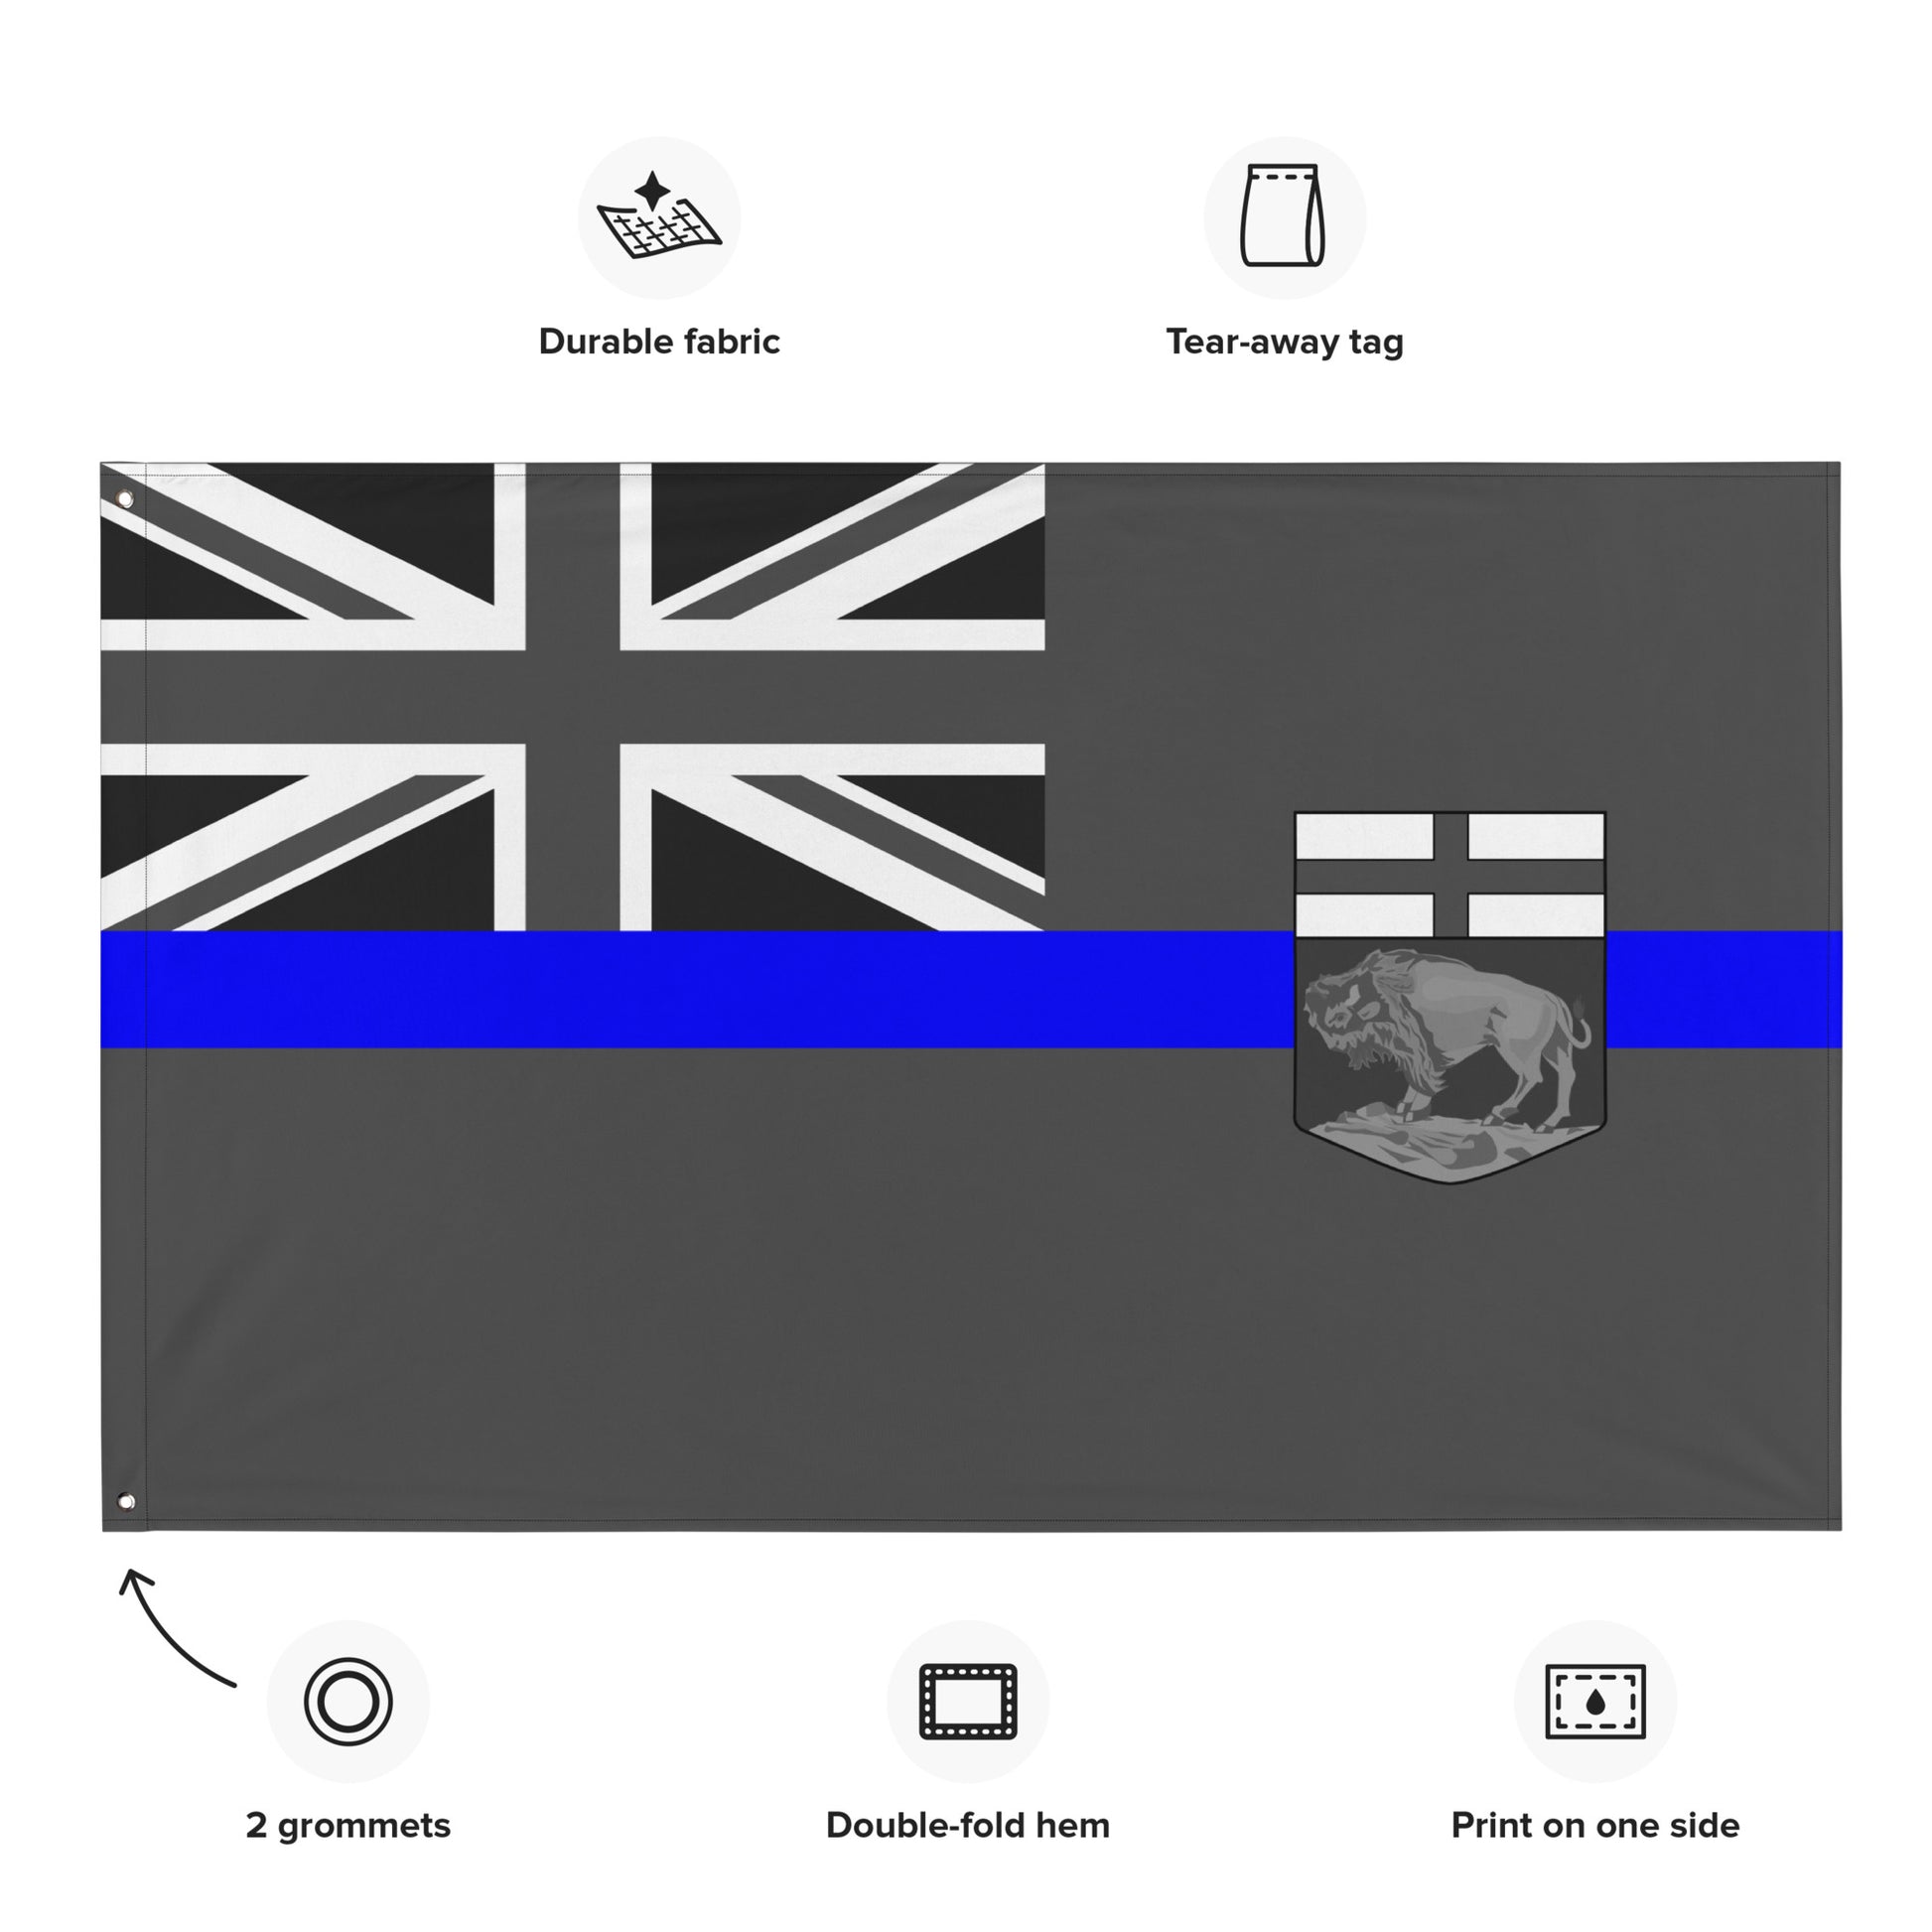 Subdued Manitoba Thin Blue Line Canada Wall Flag-911 Duty Gear Canada-911 Duty Gear Canada